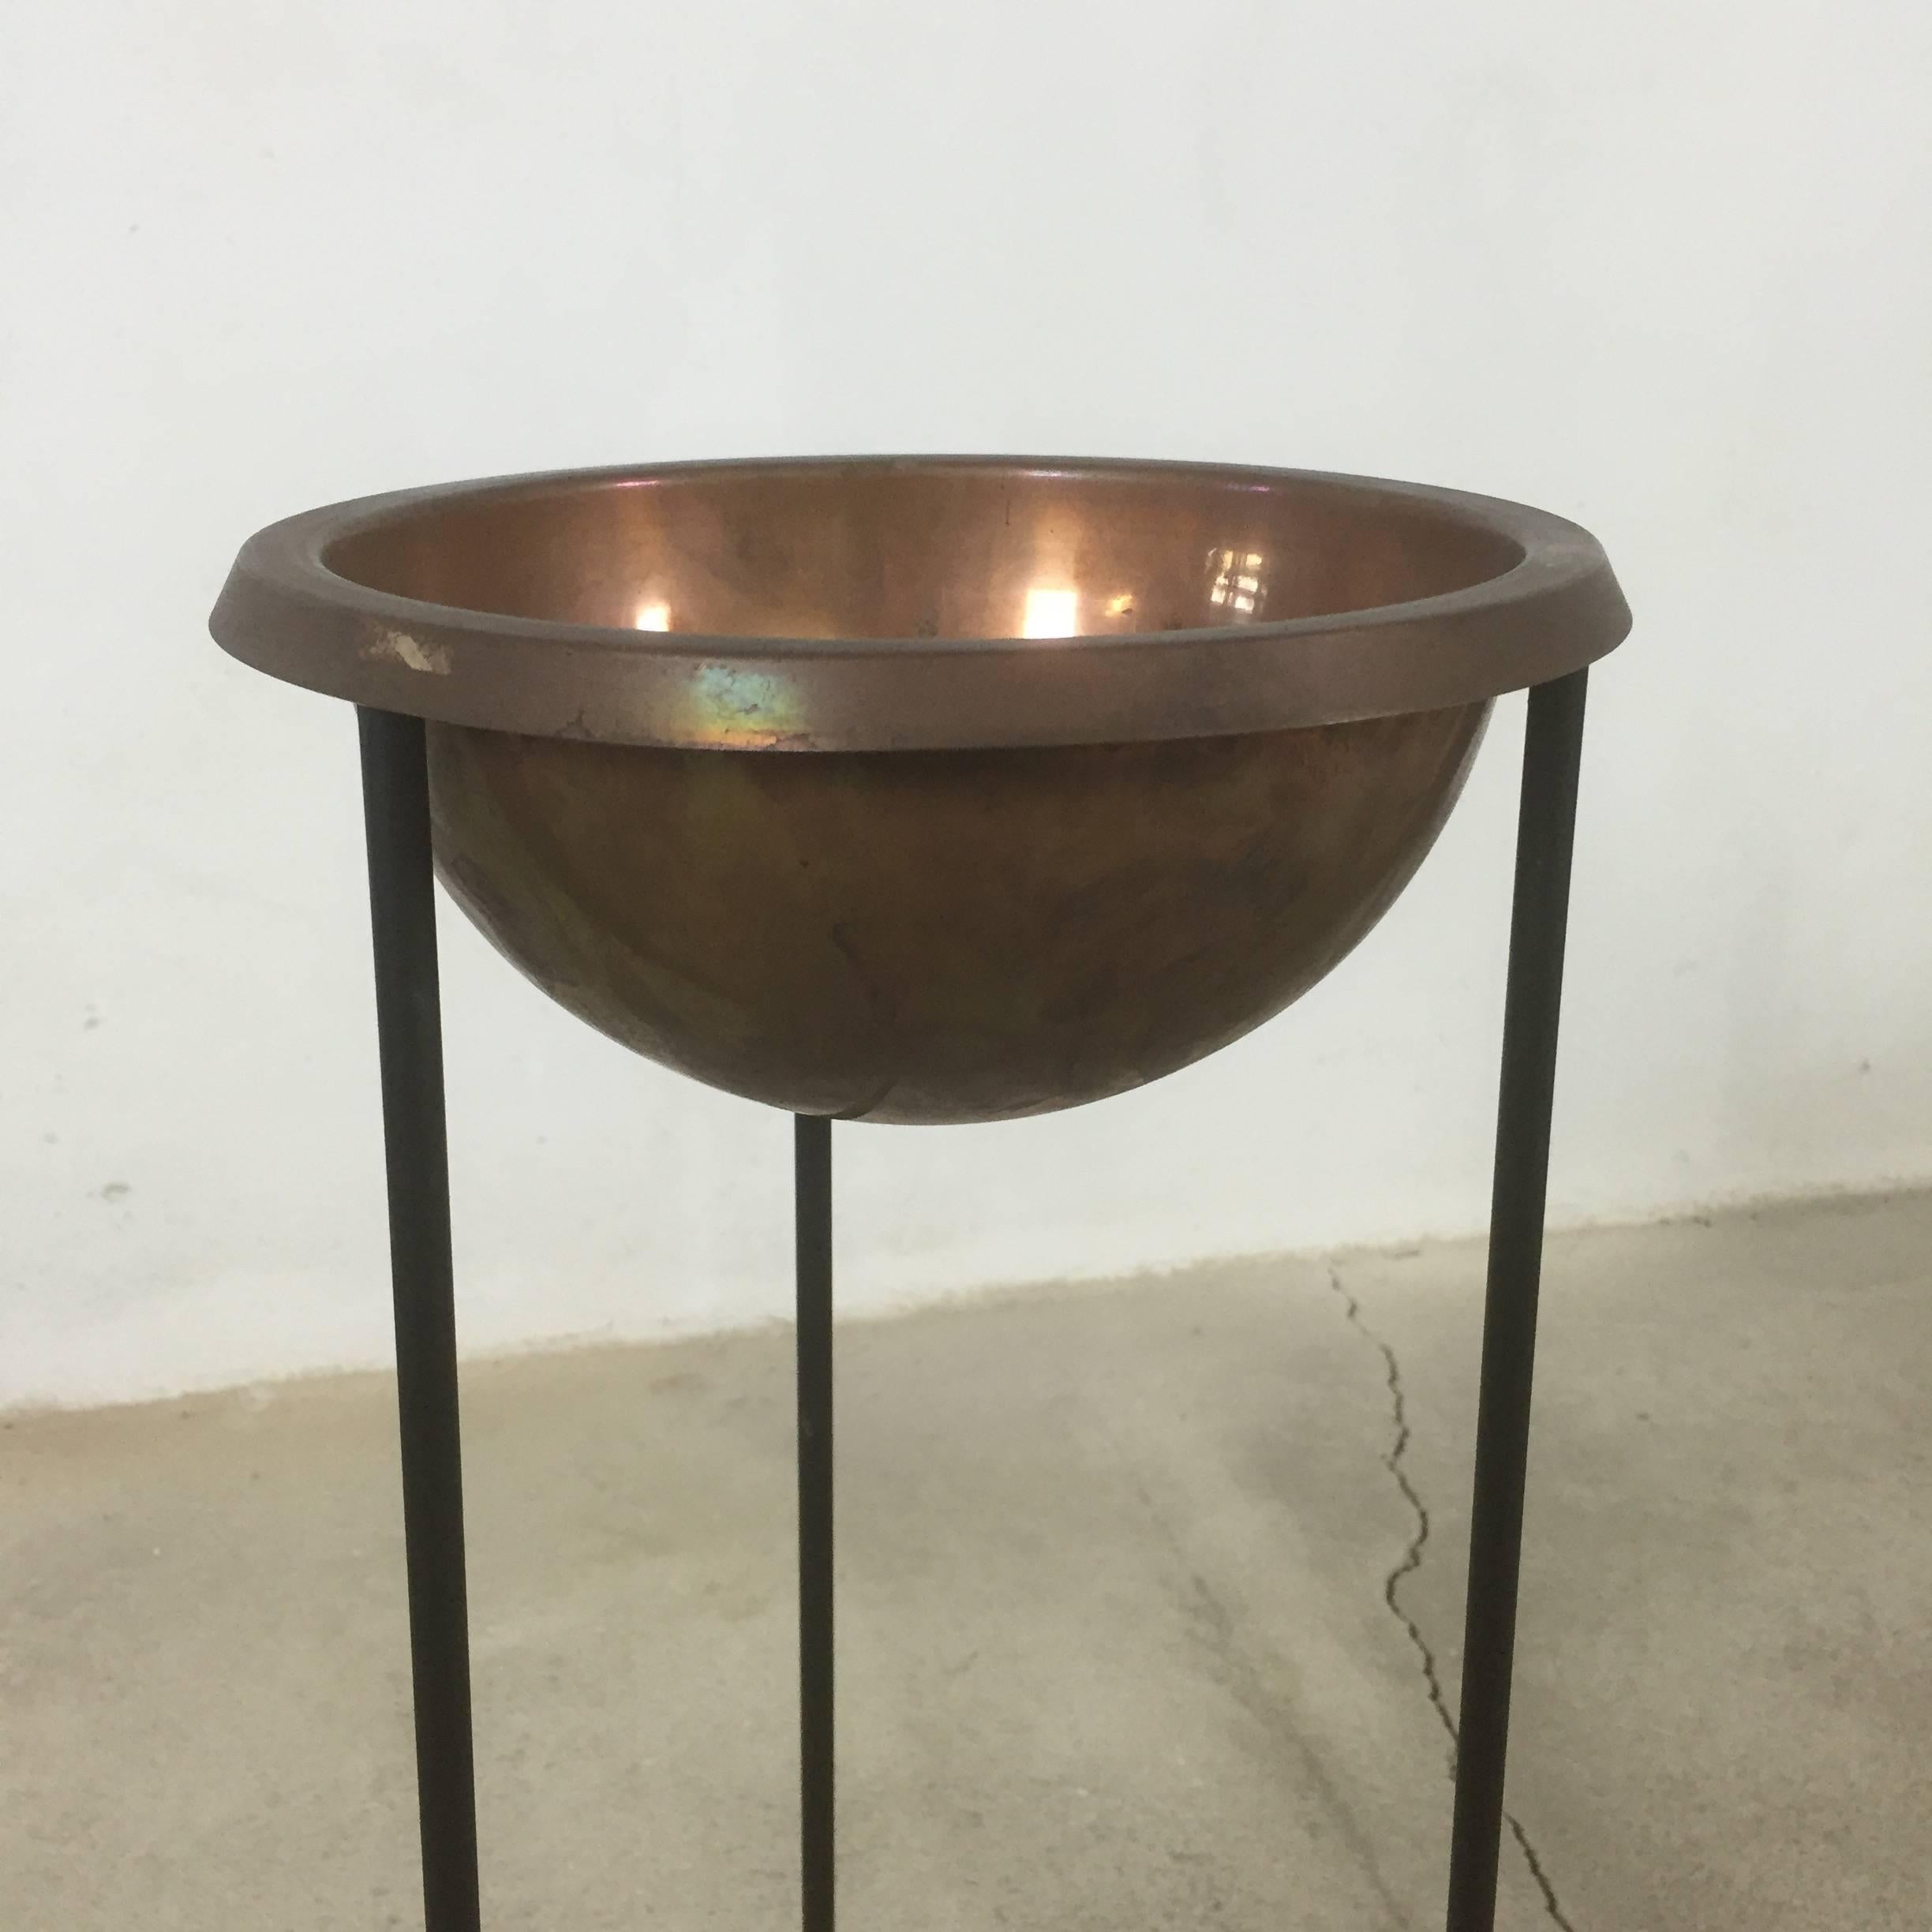 Copper Swedish Ashtray Stand by Hans-Agne Jakobsson for Hans-Agne Jakobsson AB Markaryd